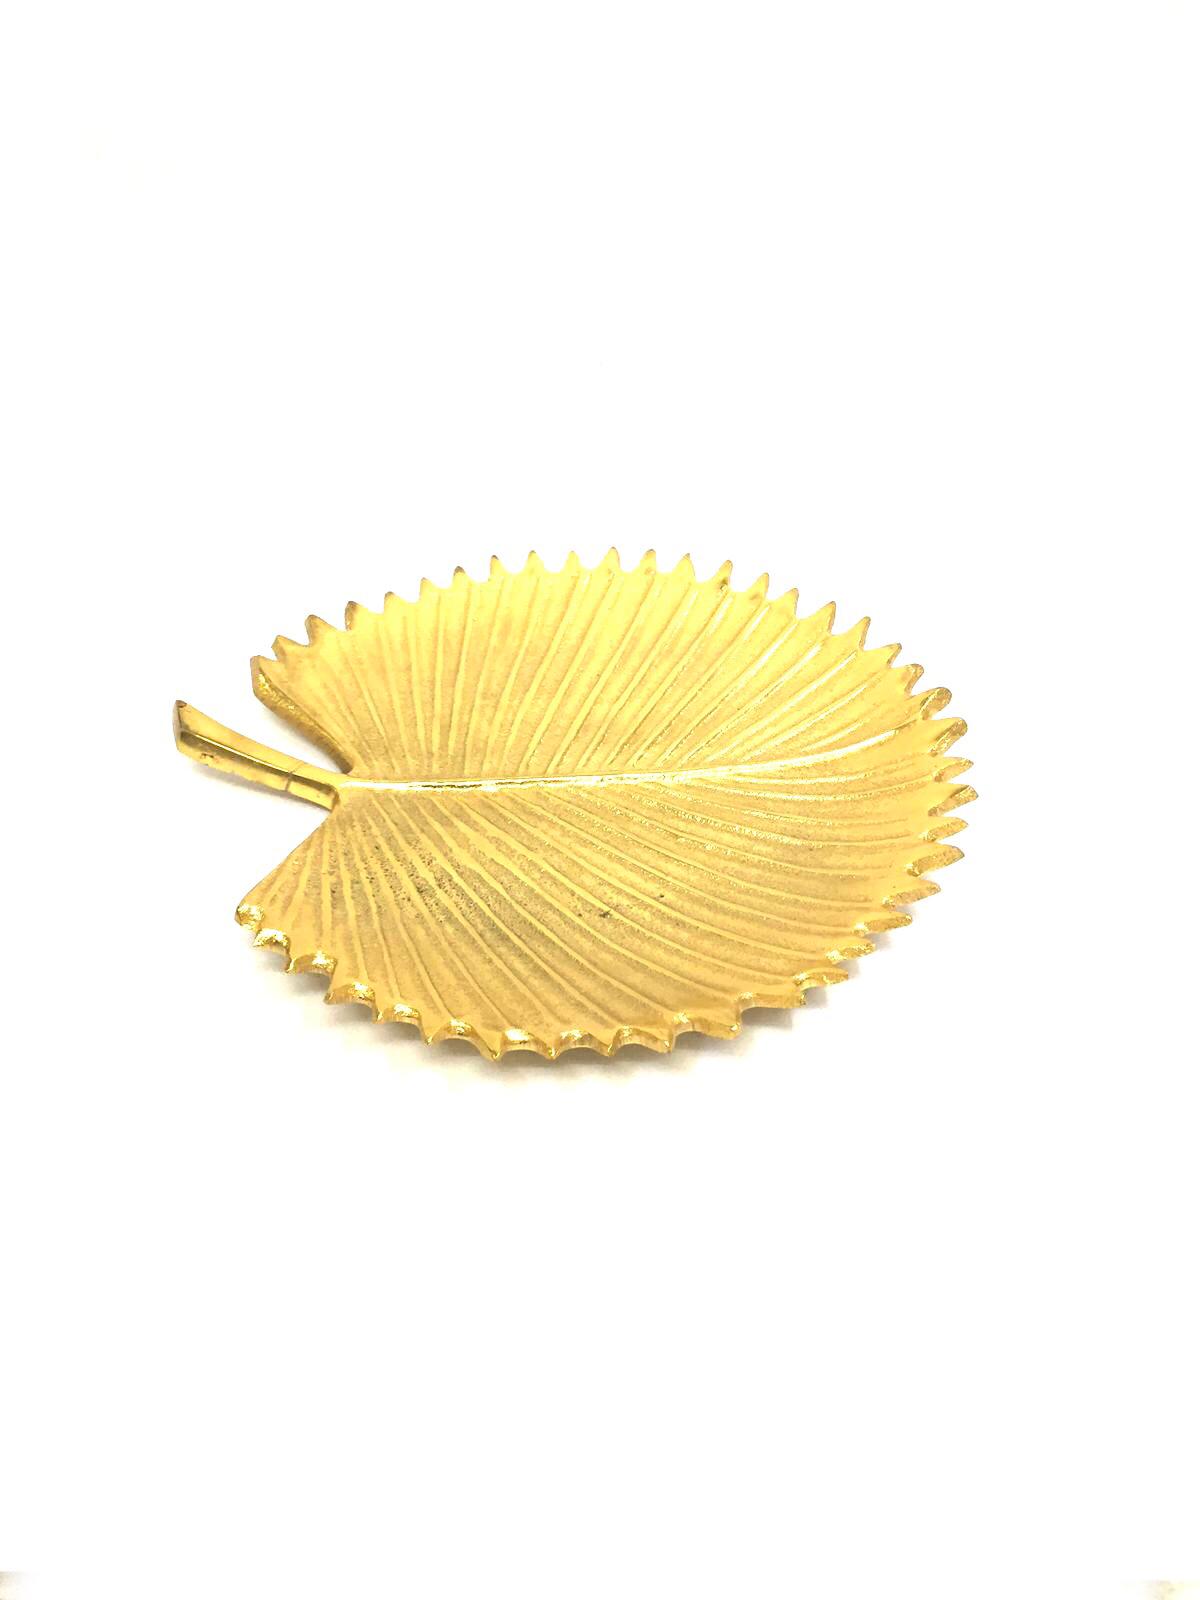 Golden Leaf Platter Metal Crafts Bring Attraction With Utility From Tamrapatra